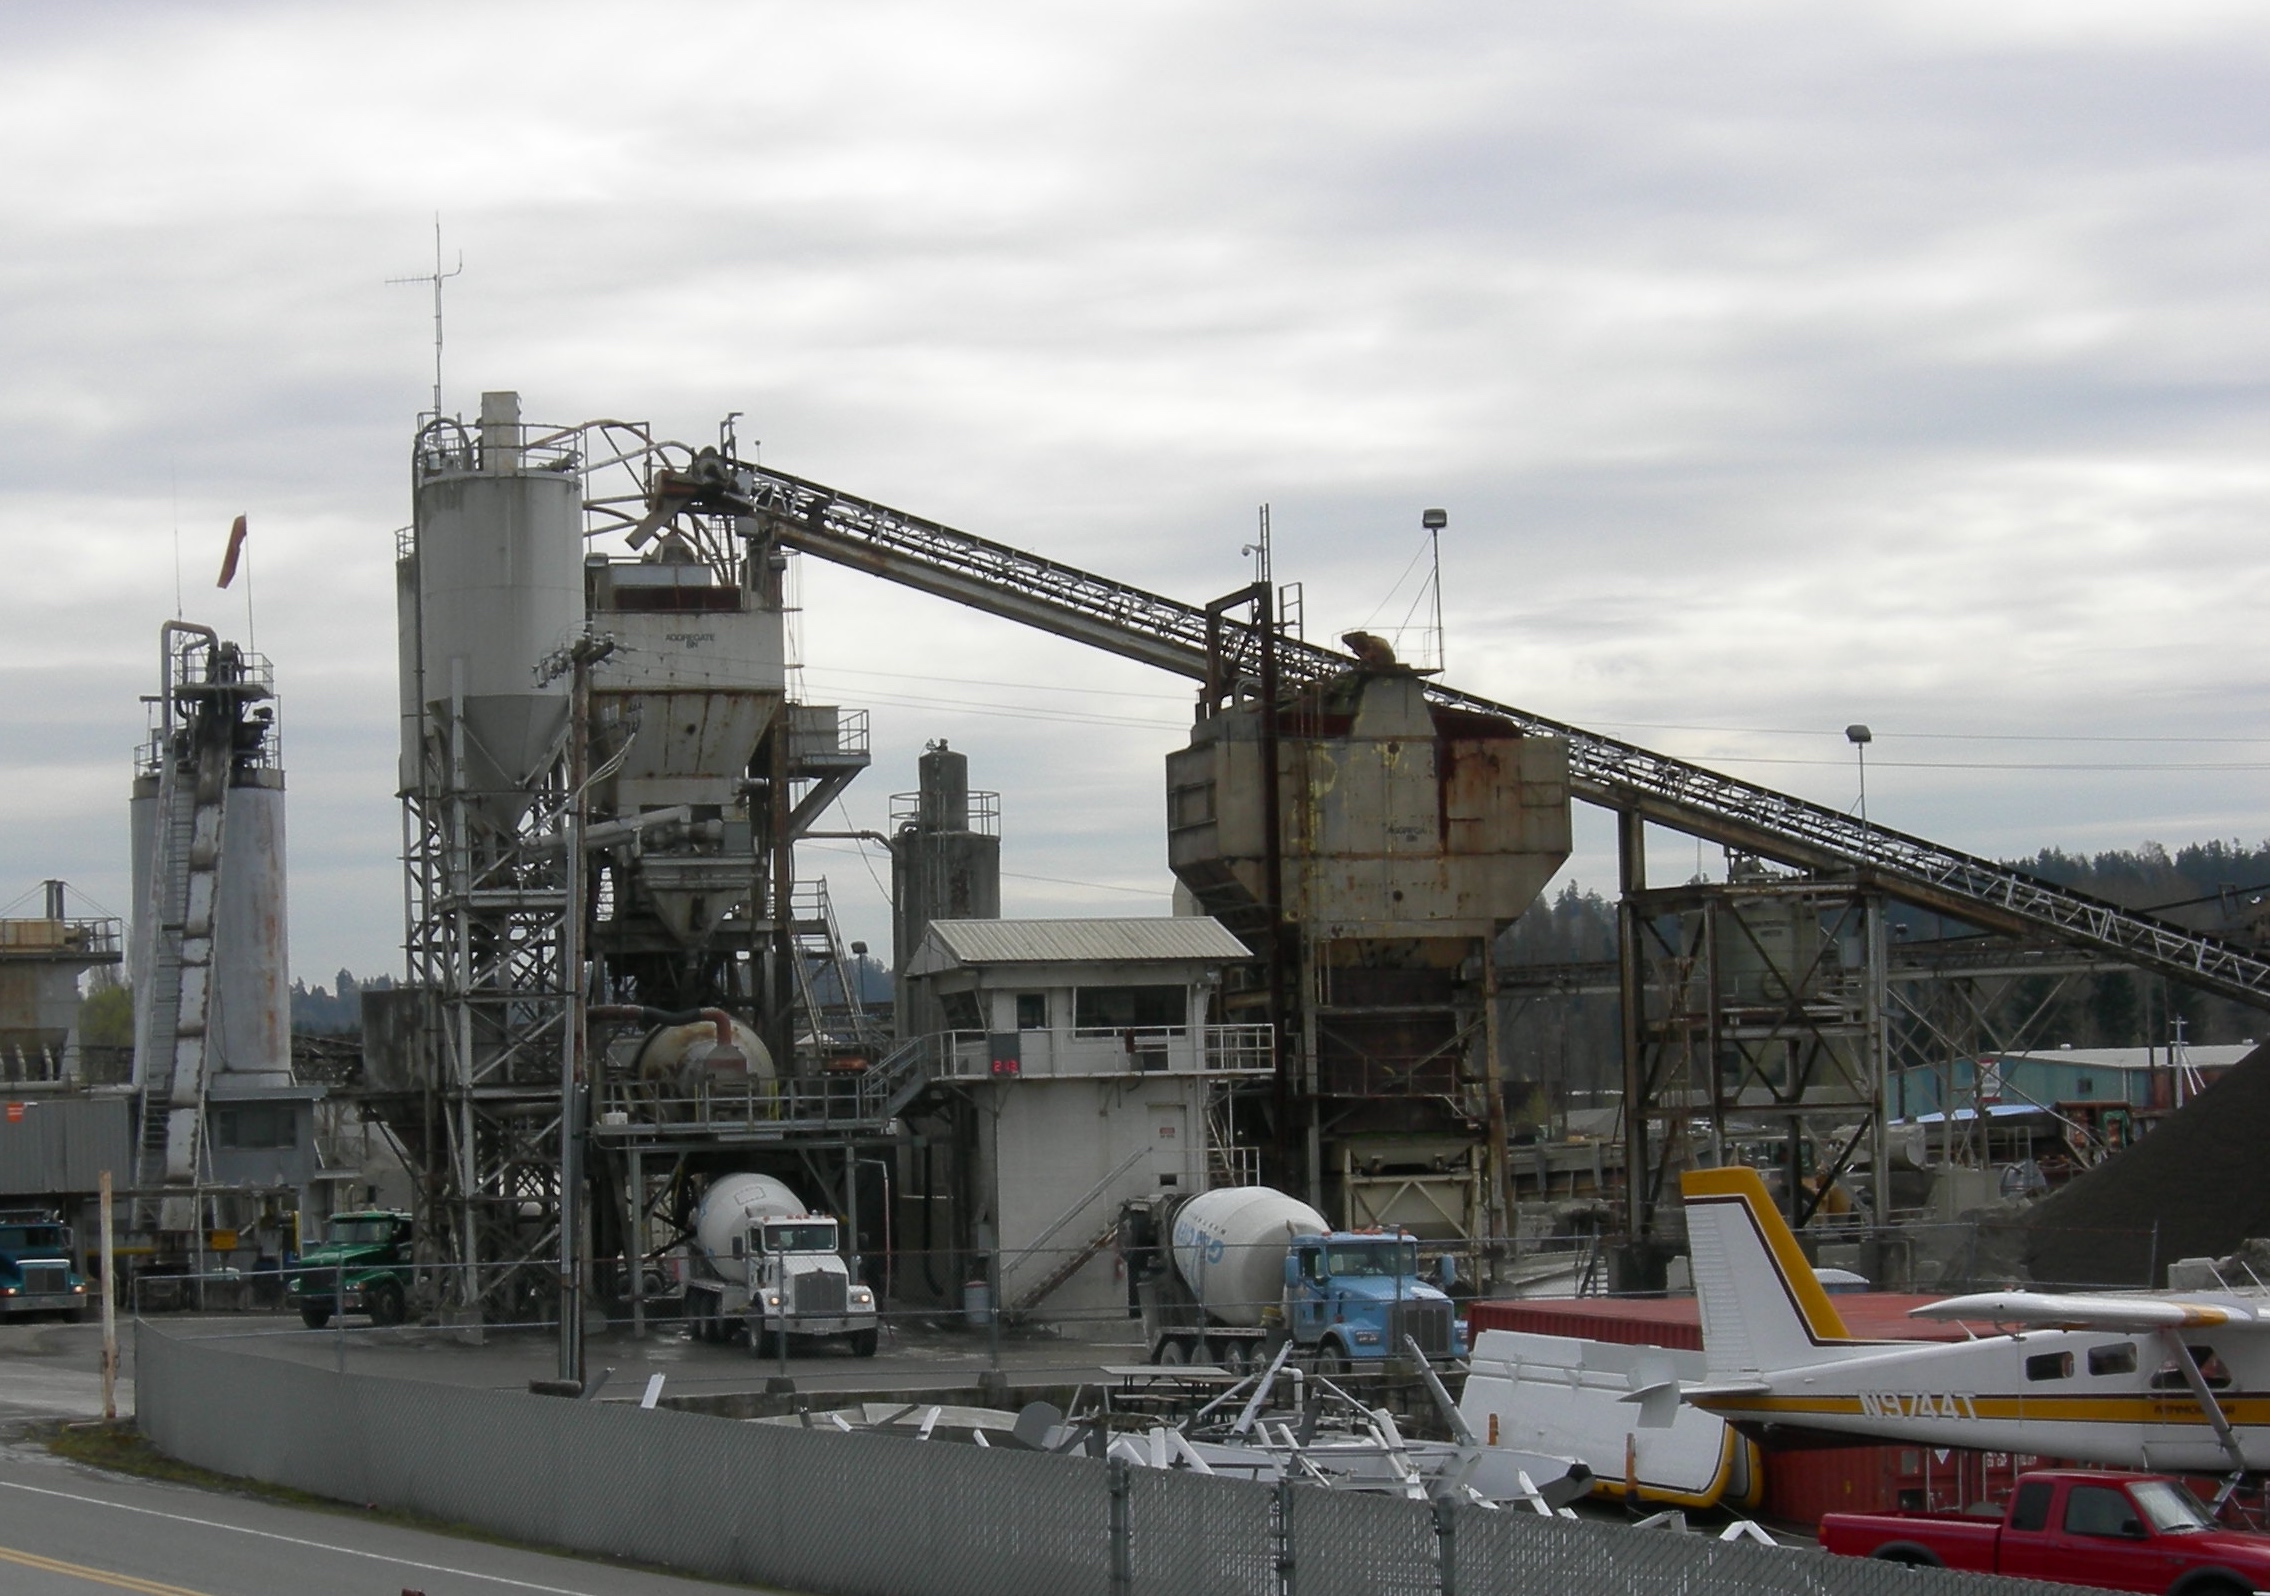 A cement plant with trucks being loaded with cement.